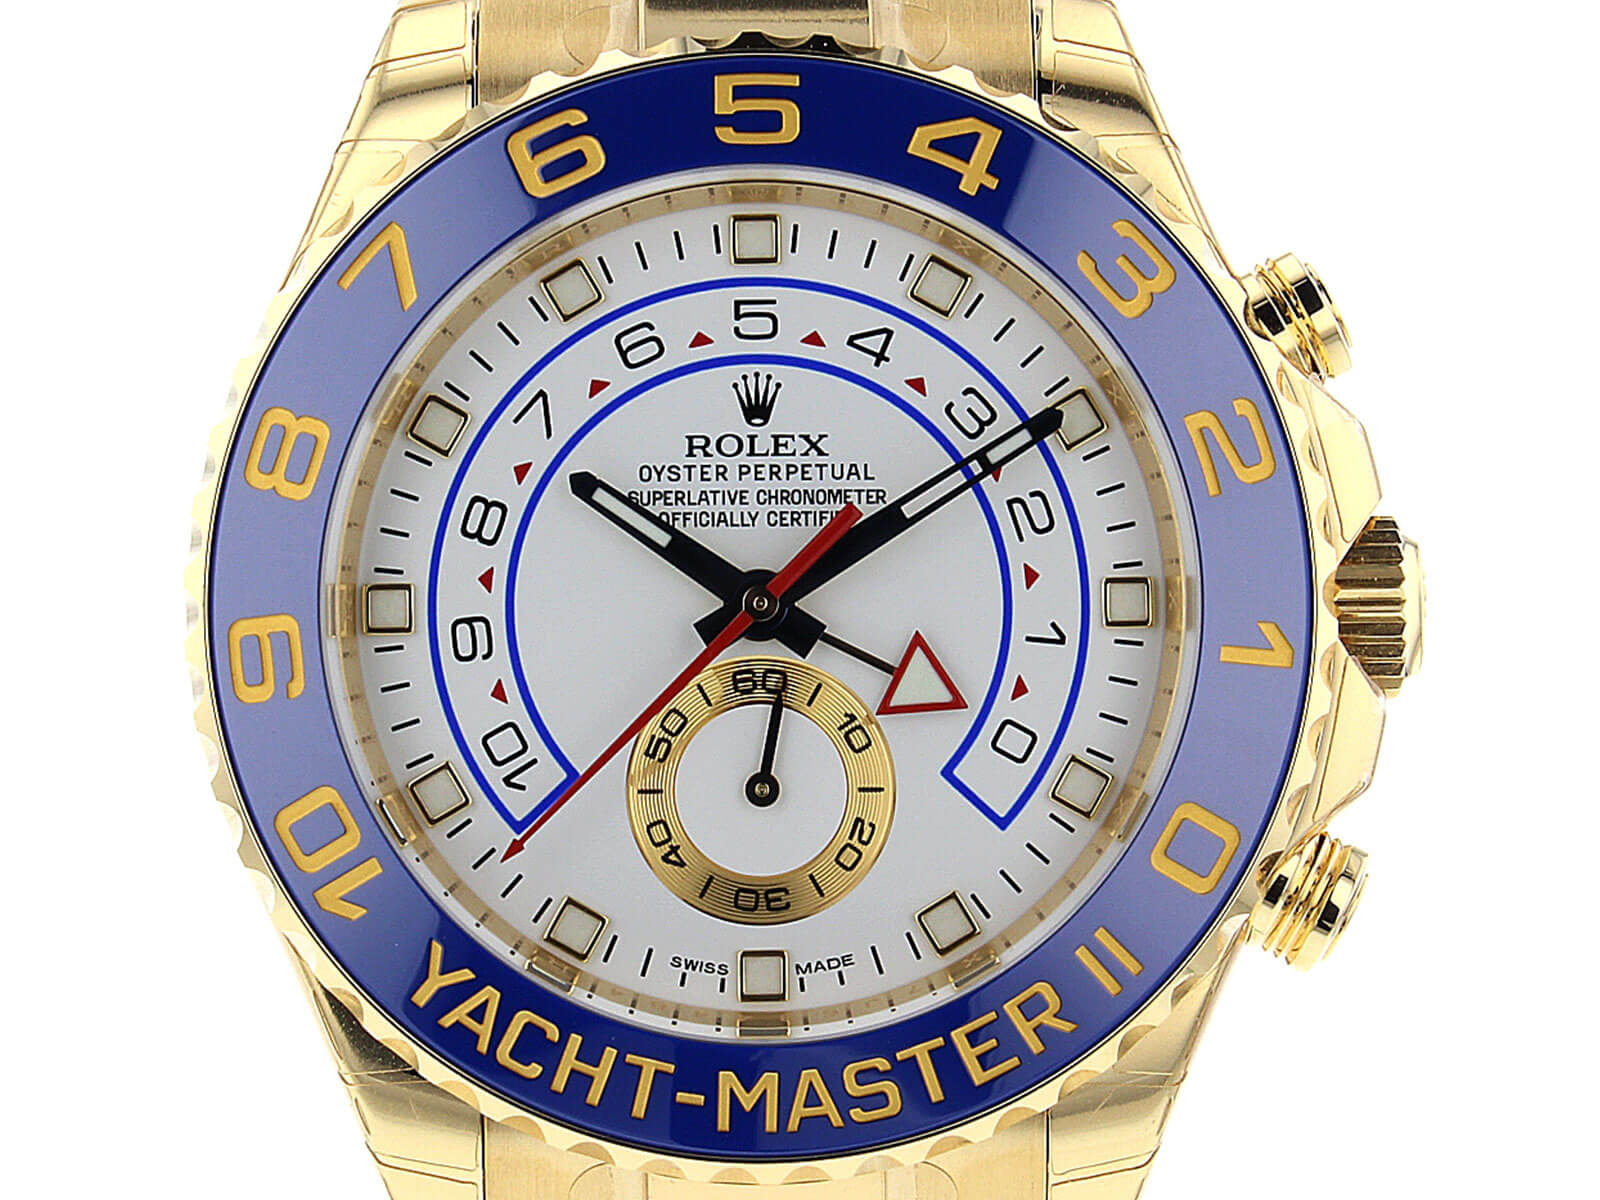 Rolex Yacht-Master II 116688 is the first Rolex model with the Blue Cerachrom Bezel